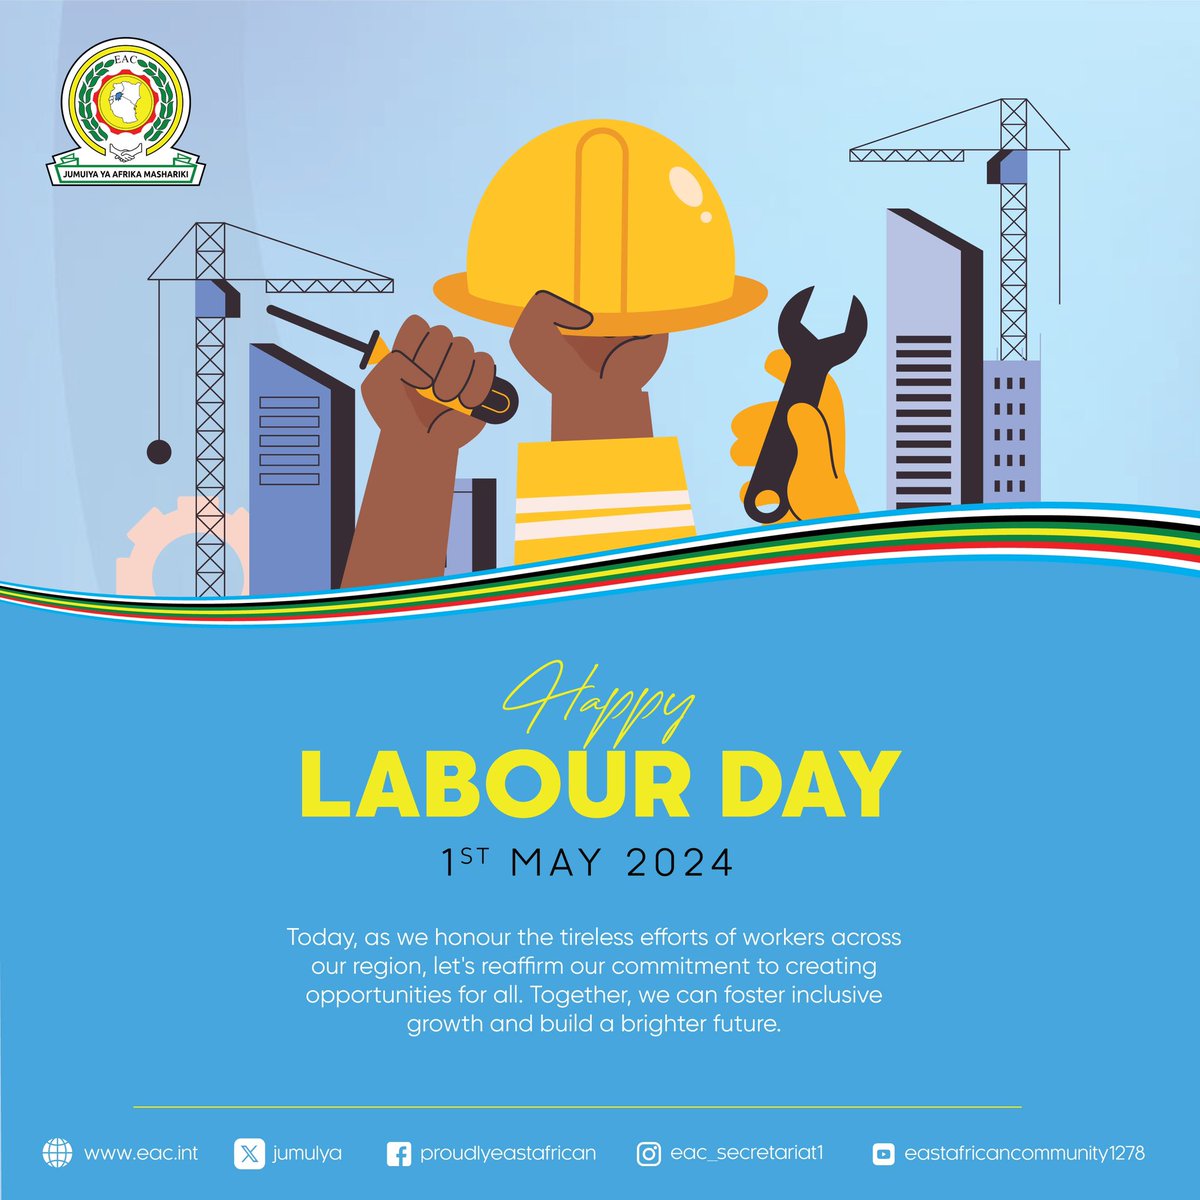 🛠️ Today, as we celebrate #LabourDay, let's take a moment to honor and appreciate the hard work of every worker across the EAC! In whatever role you play, your efforts are appreciated as they are what keeps our community thriving. #HappyLabourDay